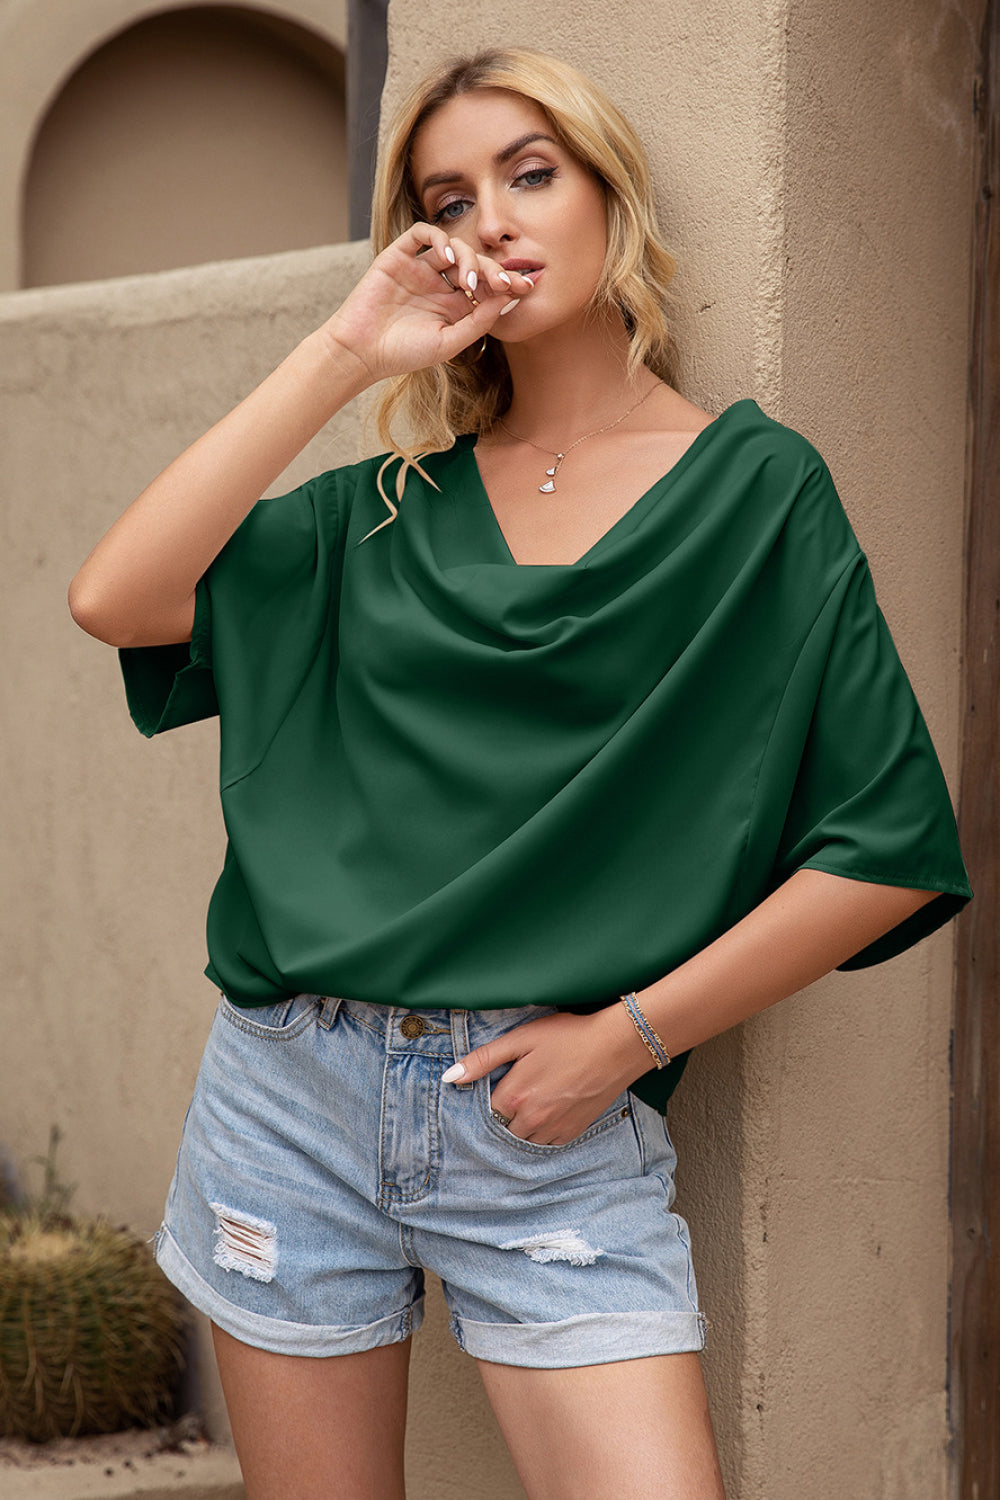 Cowl Neck Batwing Sleeve Top